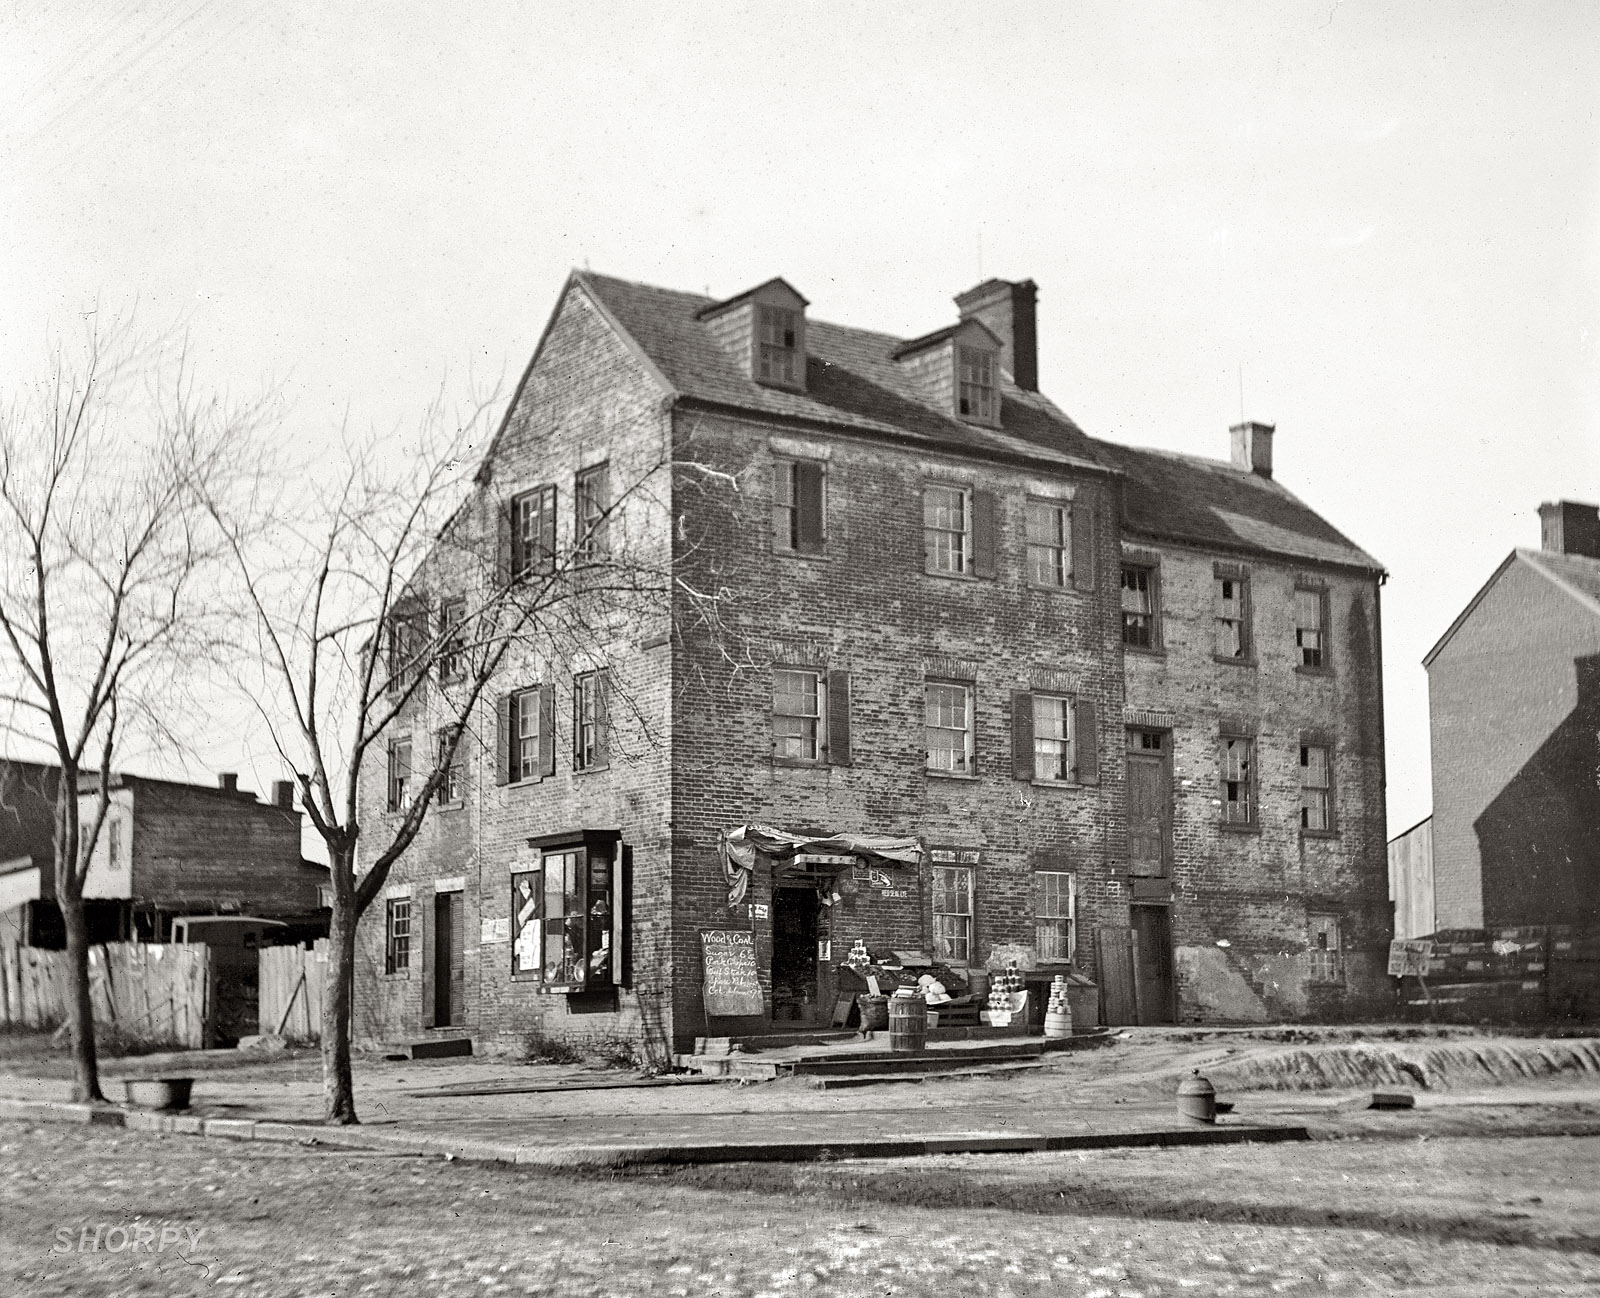 Next in National Photo's "old house" series from circa 1918: "Old house, 1st & N Street N.E." National Photo Company Collection glass negative. View full size.